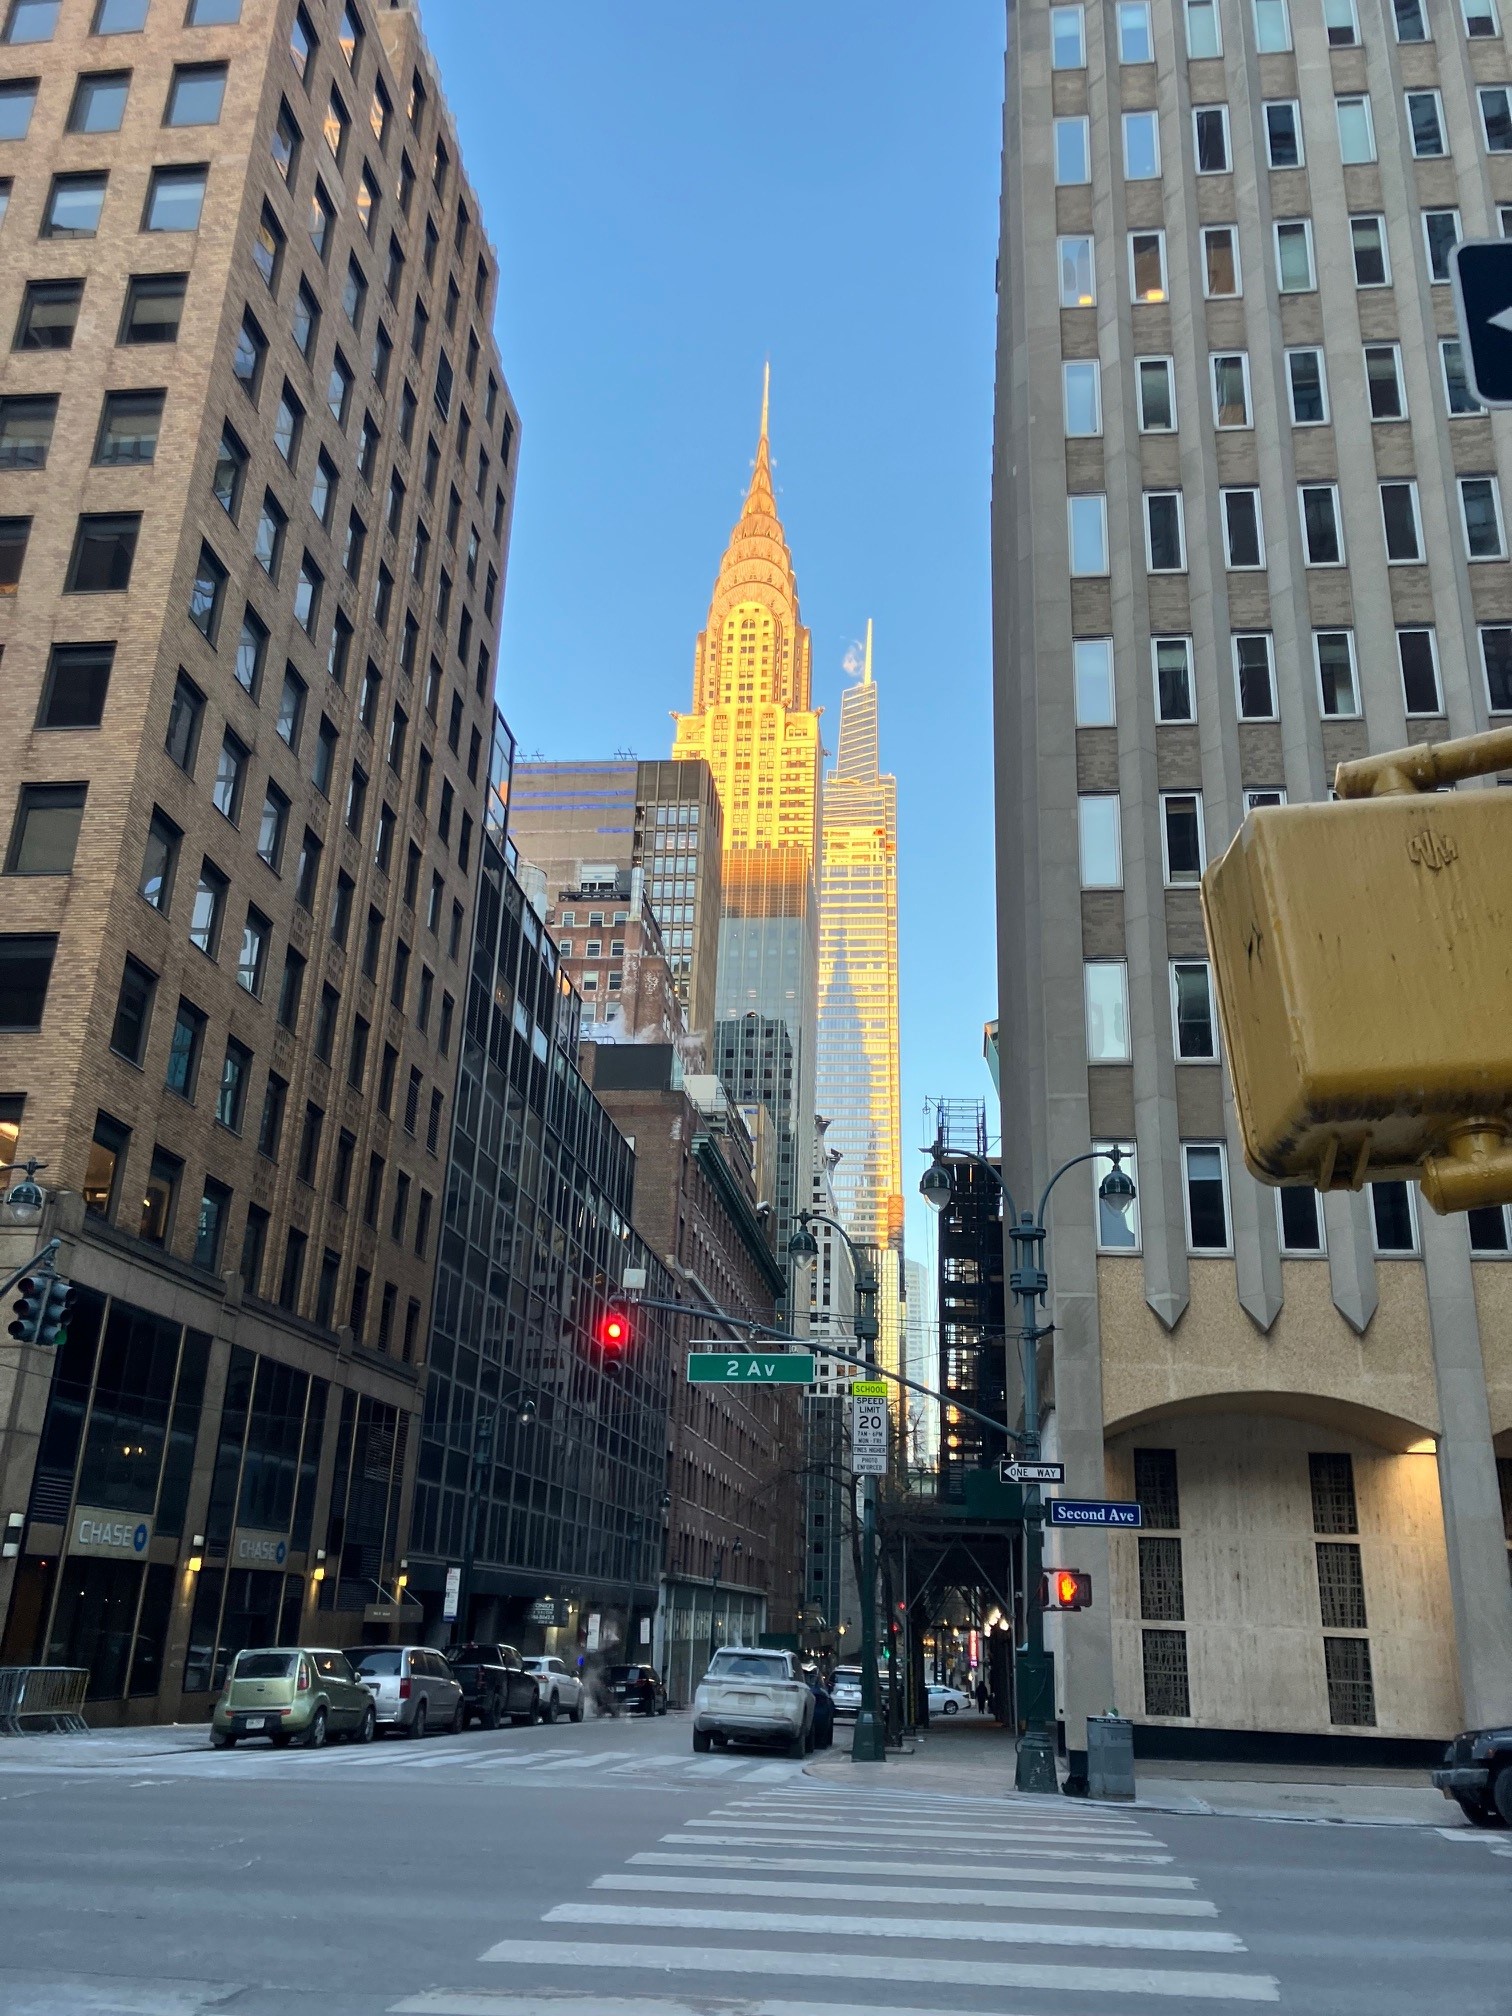 This image shows the Chrysler Building in Midtown Manhattan